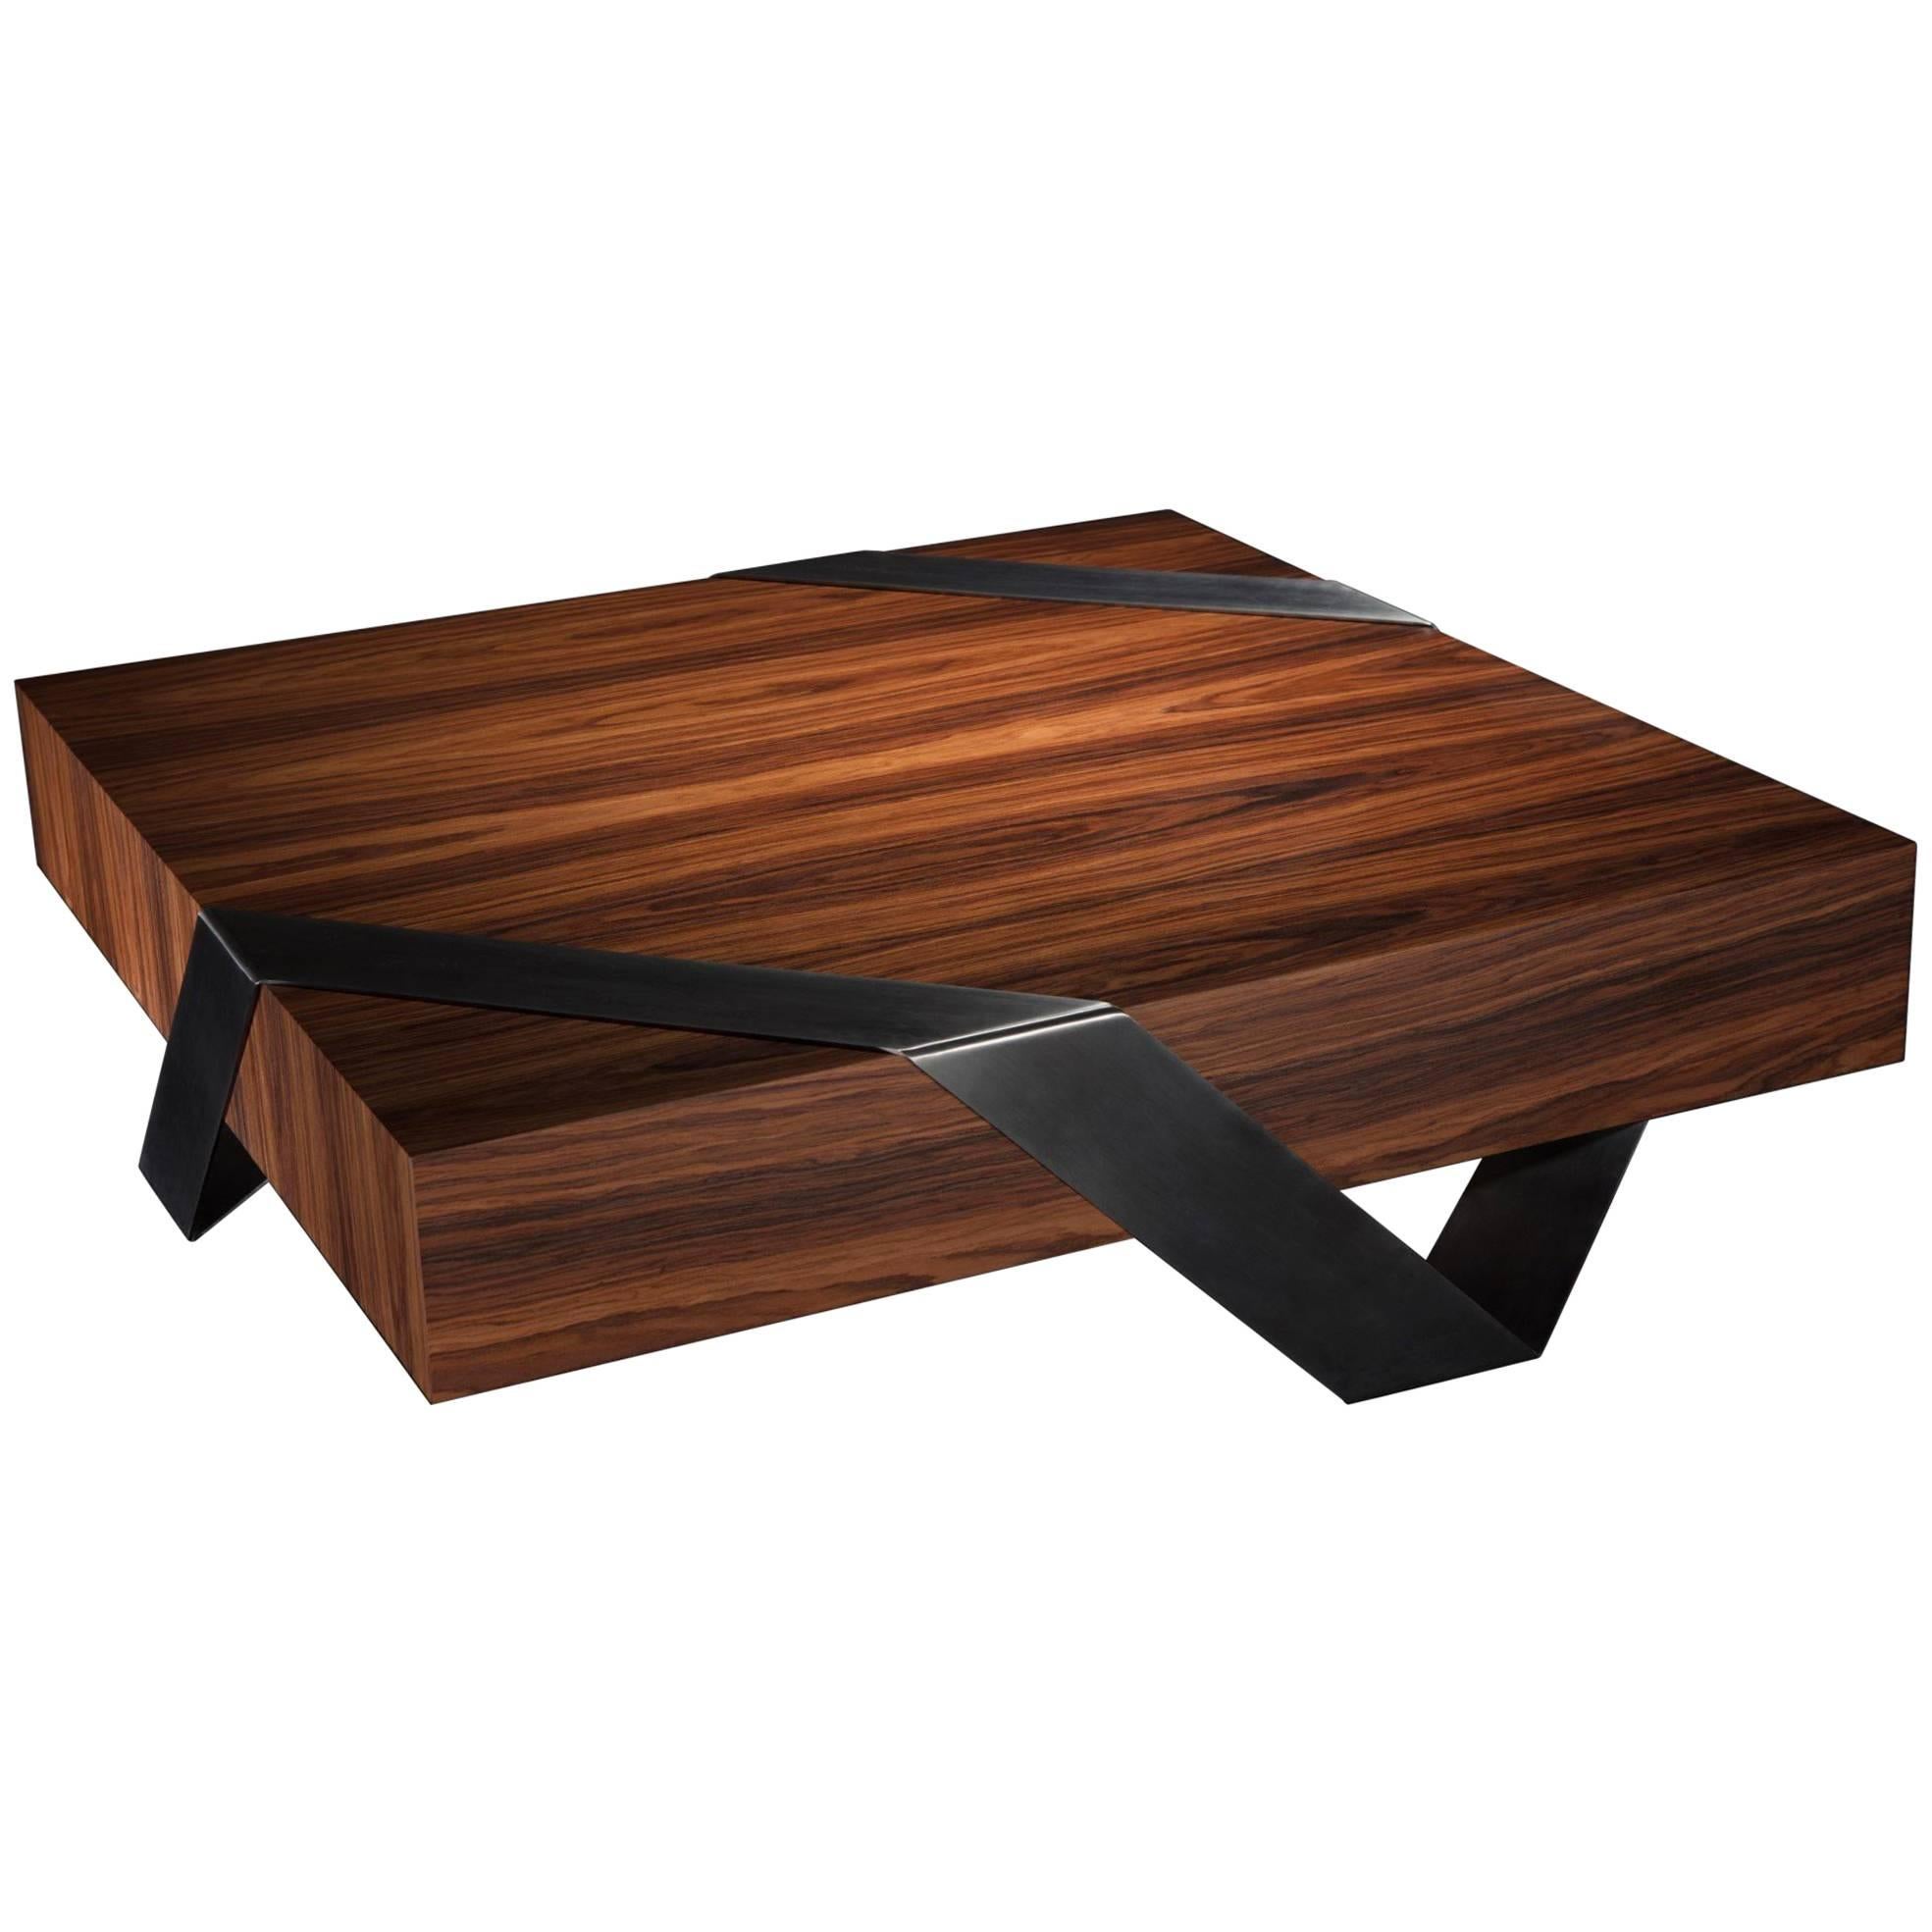 Gift Wrap Iron Wood Coffee Table with Brushed Stainless Steel Leg For Sale